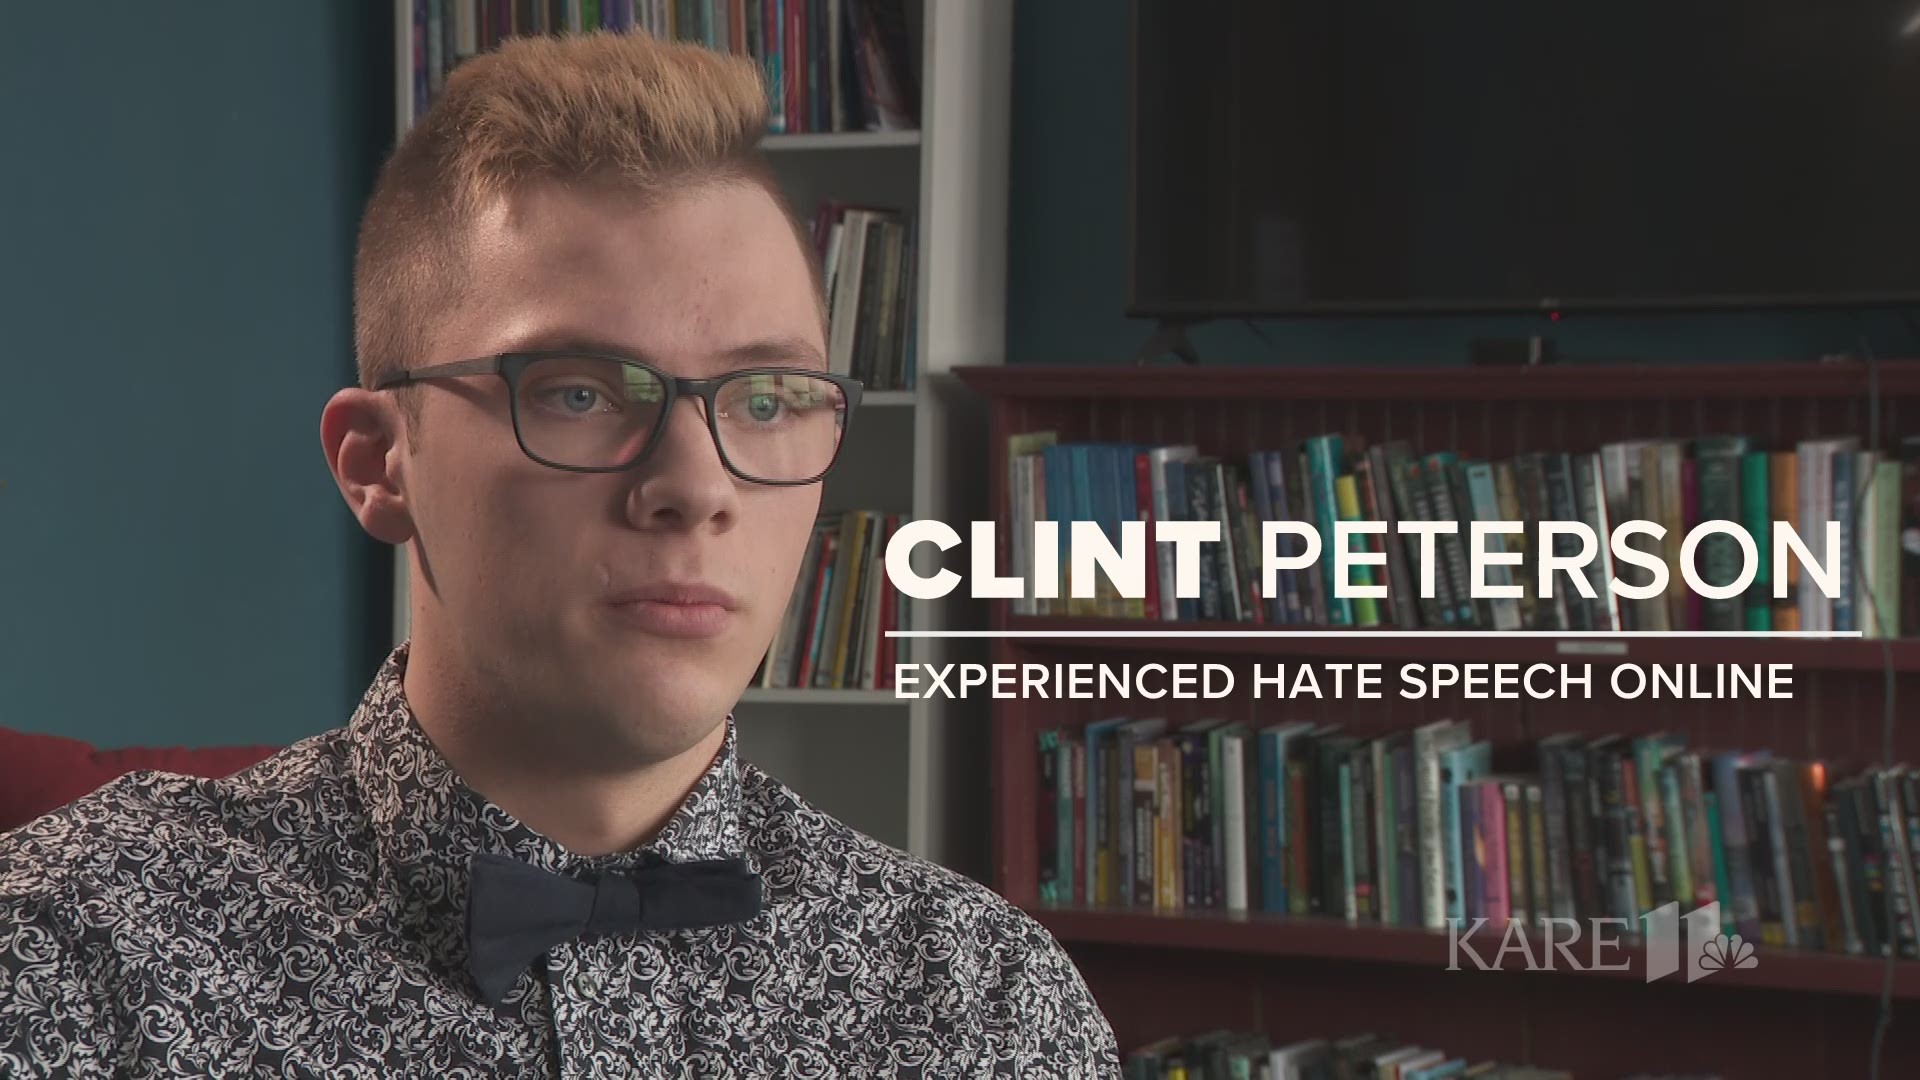 Hate speech is finding kids online, even if they're not looking. Clint Peterson, an LGBTQ youth advocate from greater Minnesota, experienced that firsthand. https://kare11.tv/2UHn9bg